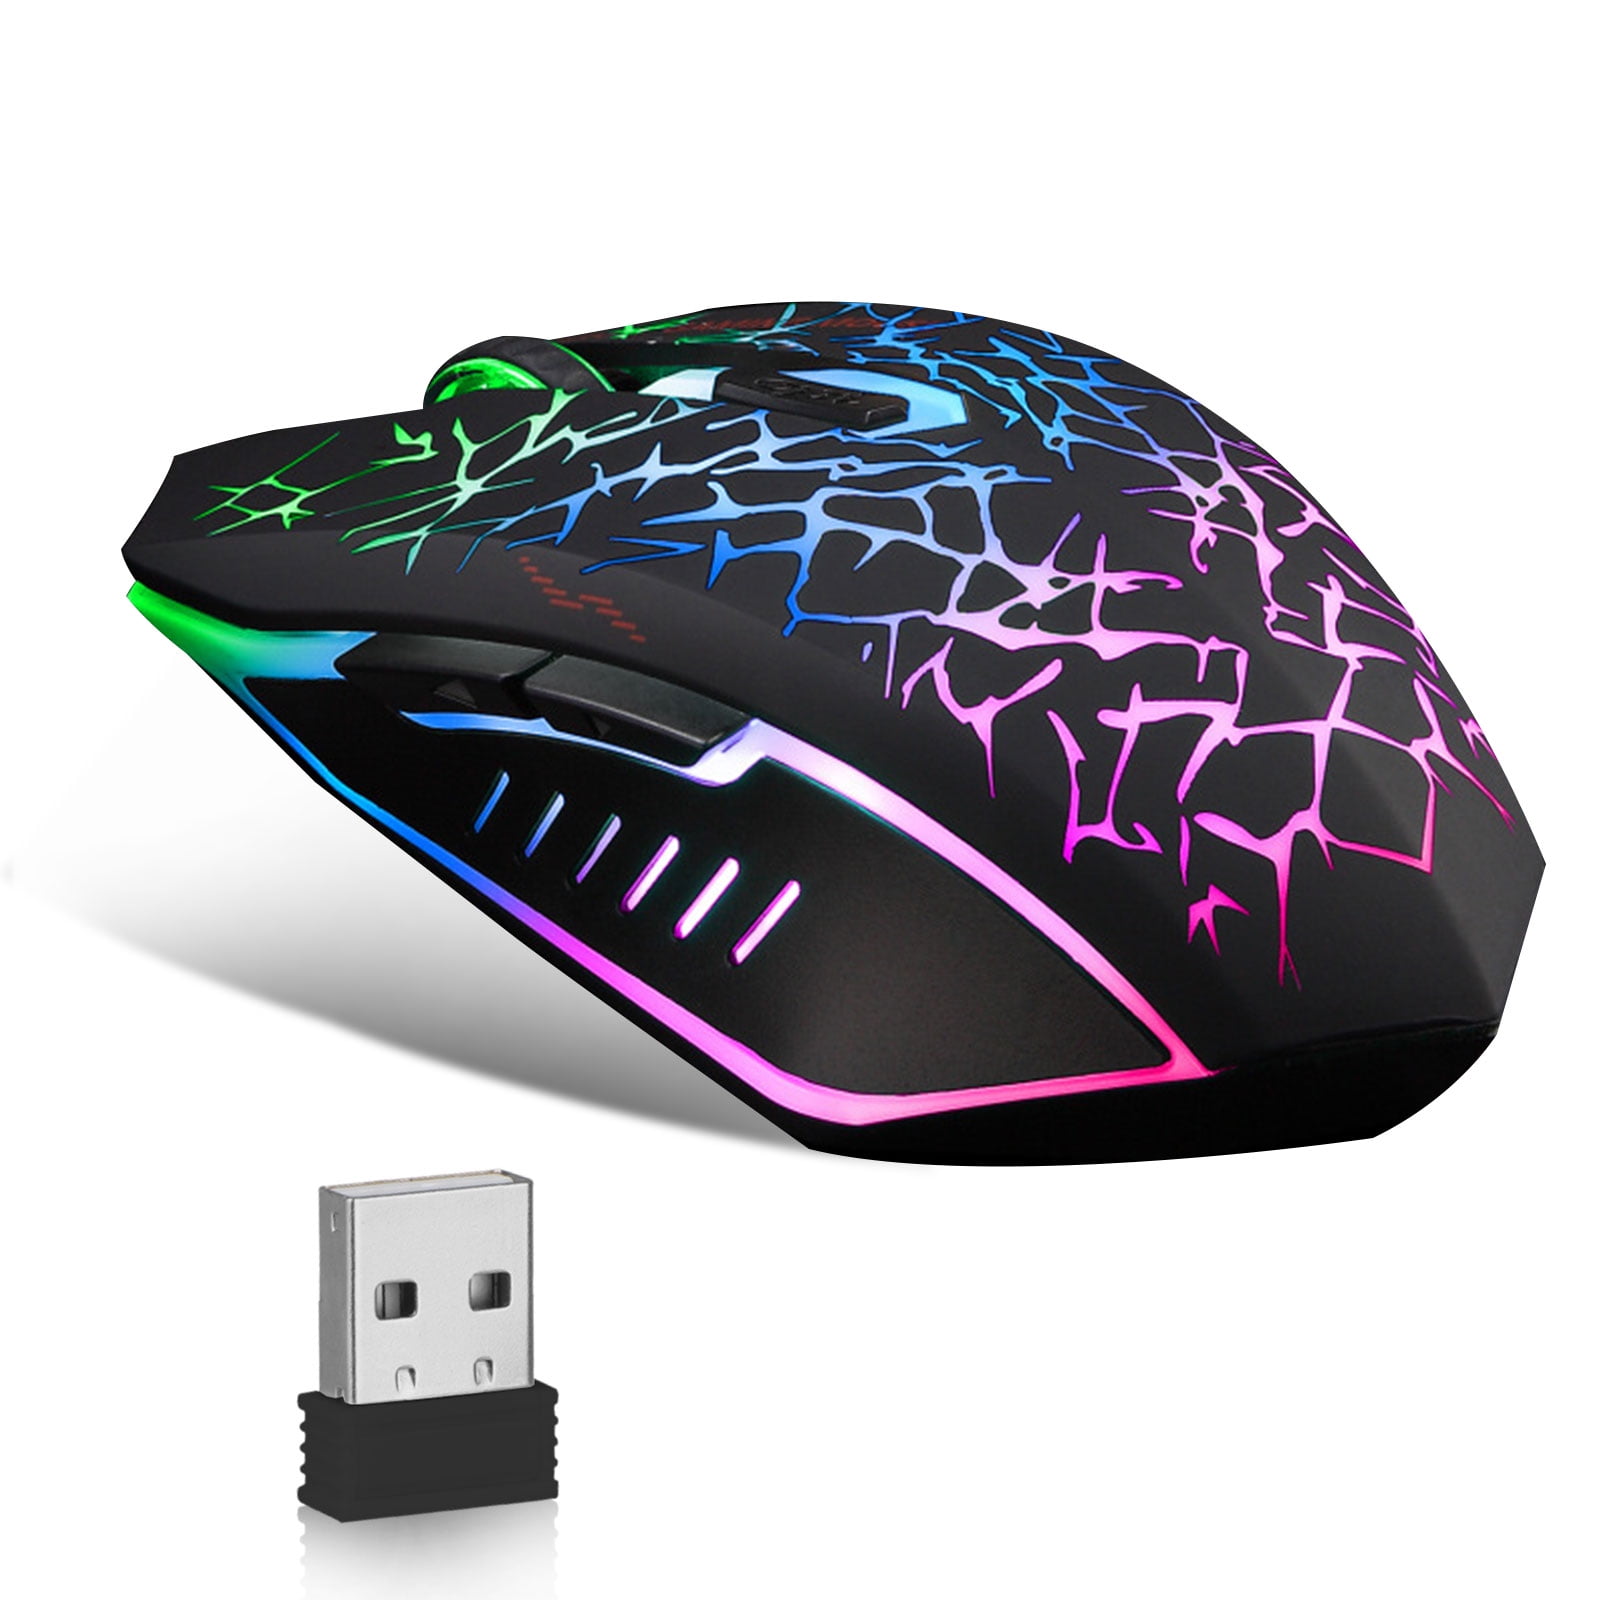 Wireless 2.4GHz Gaming Mouse Portable USB Optical Mice For PC Laptop Computer 